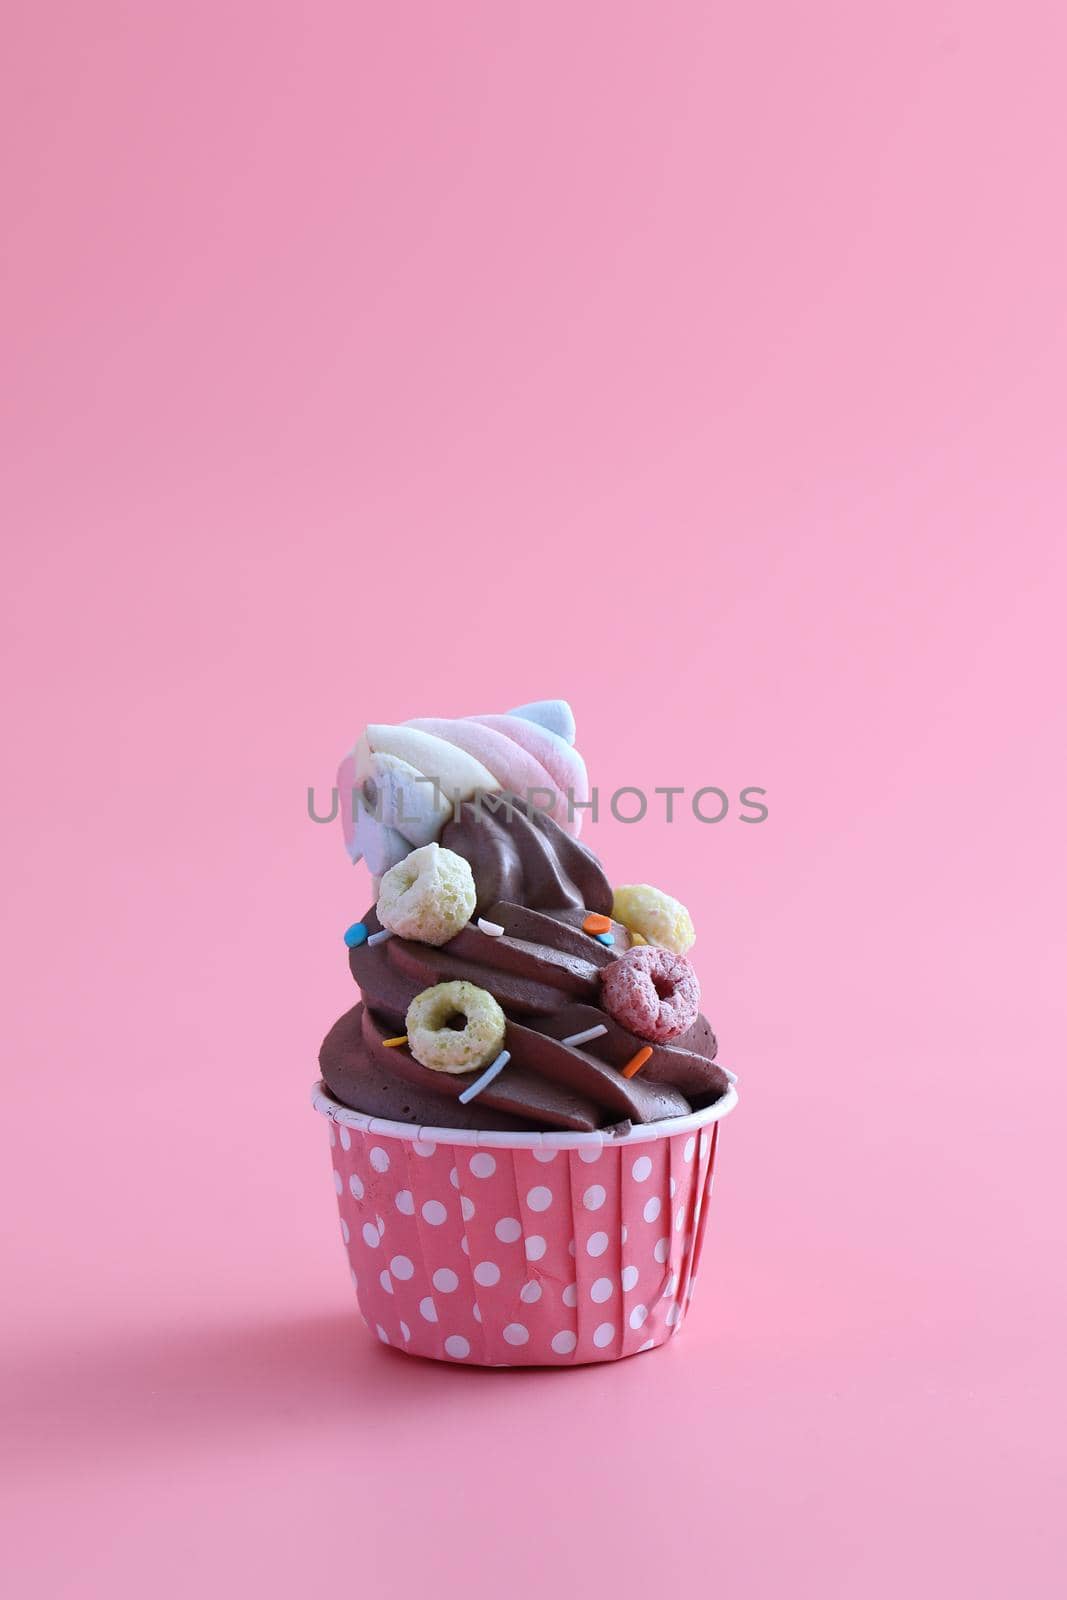 Chocolate cupcake isolated in pink background